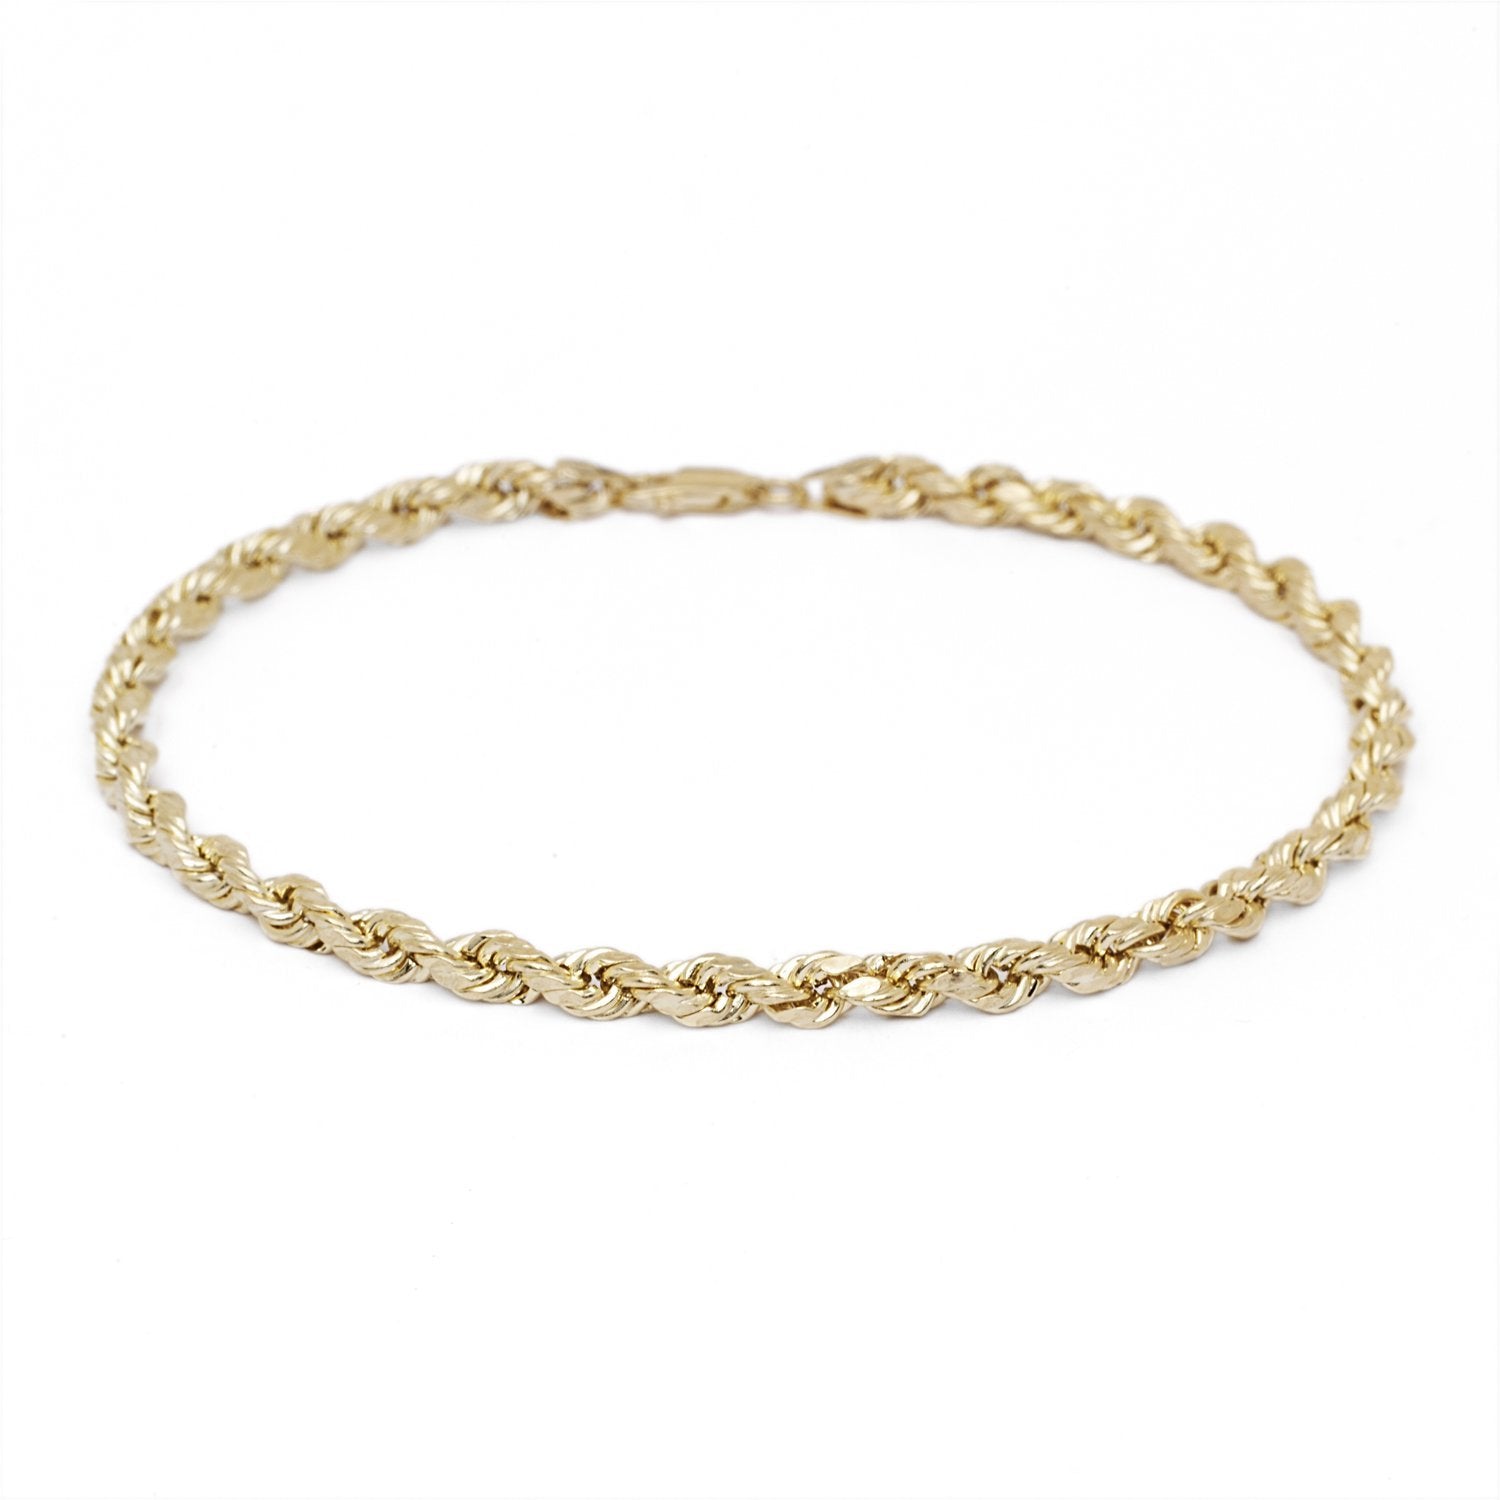 10k Yellow Gold Solid Diamond Cut Rope Chain Bracelet and Anklet, 6mm (0.24